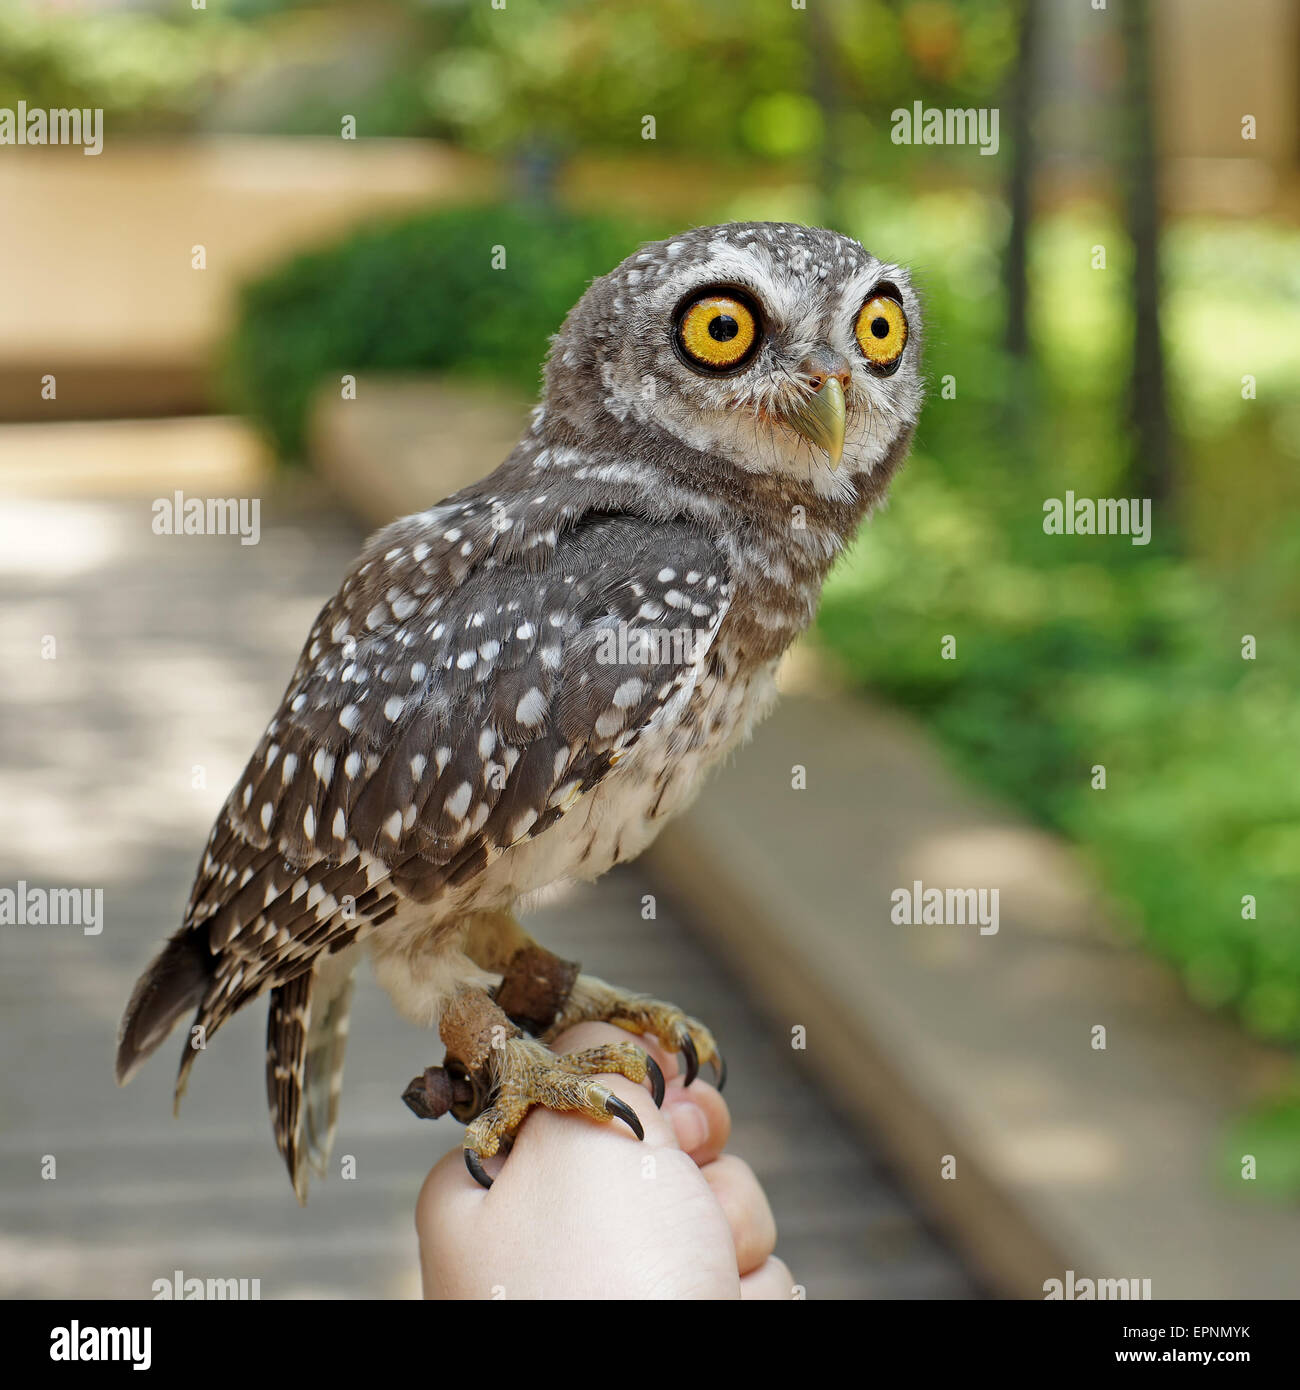 spotted owlet or athene brama bird on a hand Stock Photo